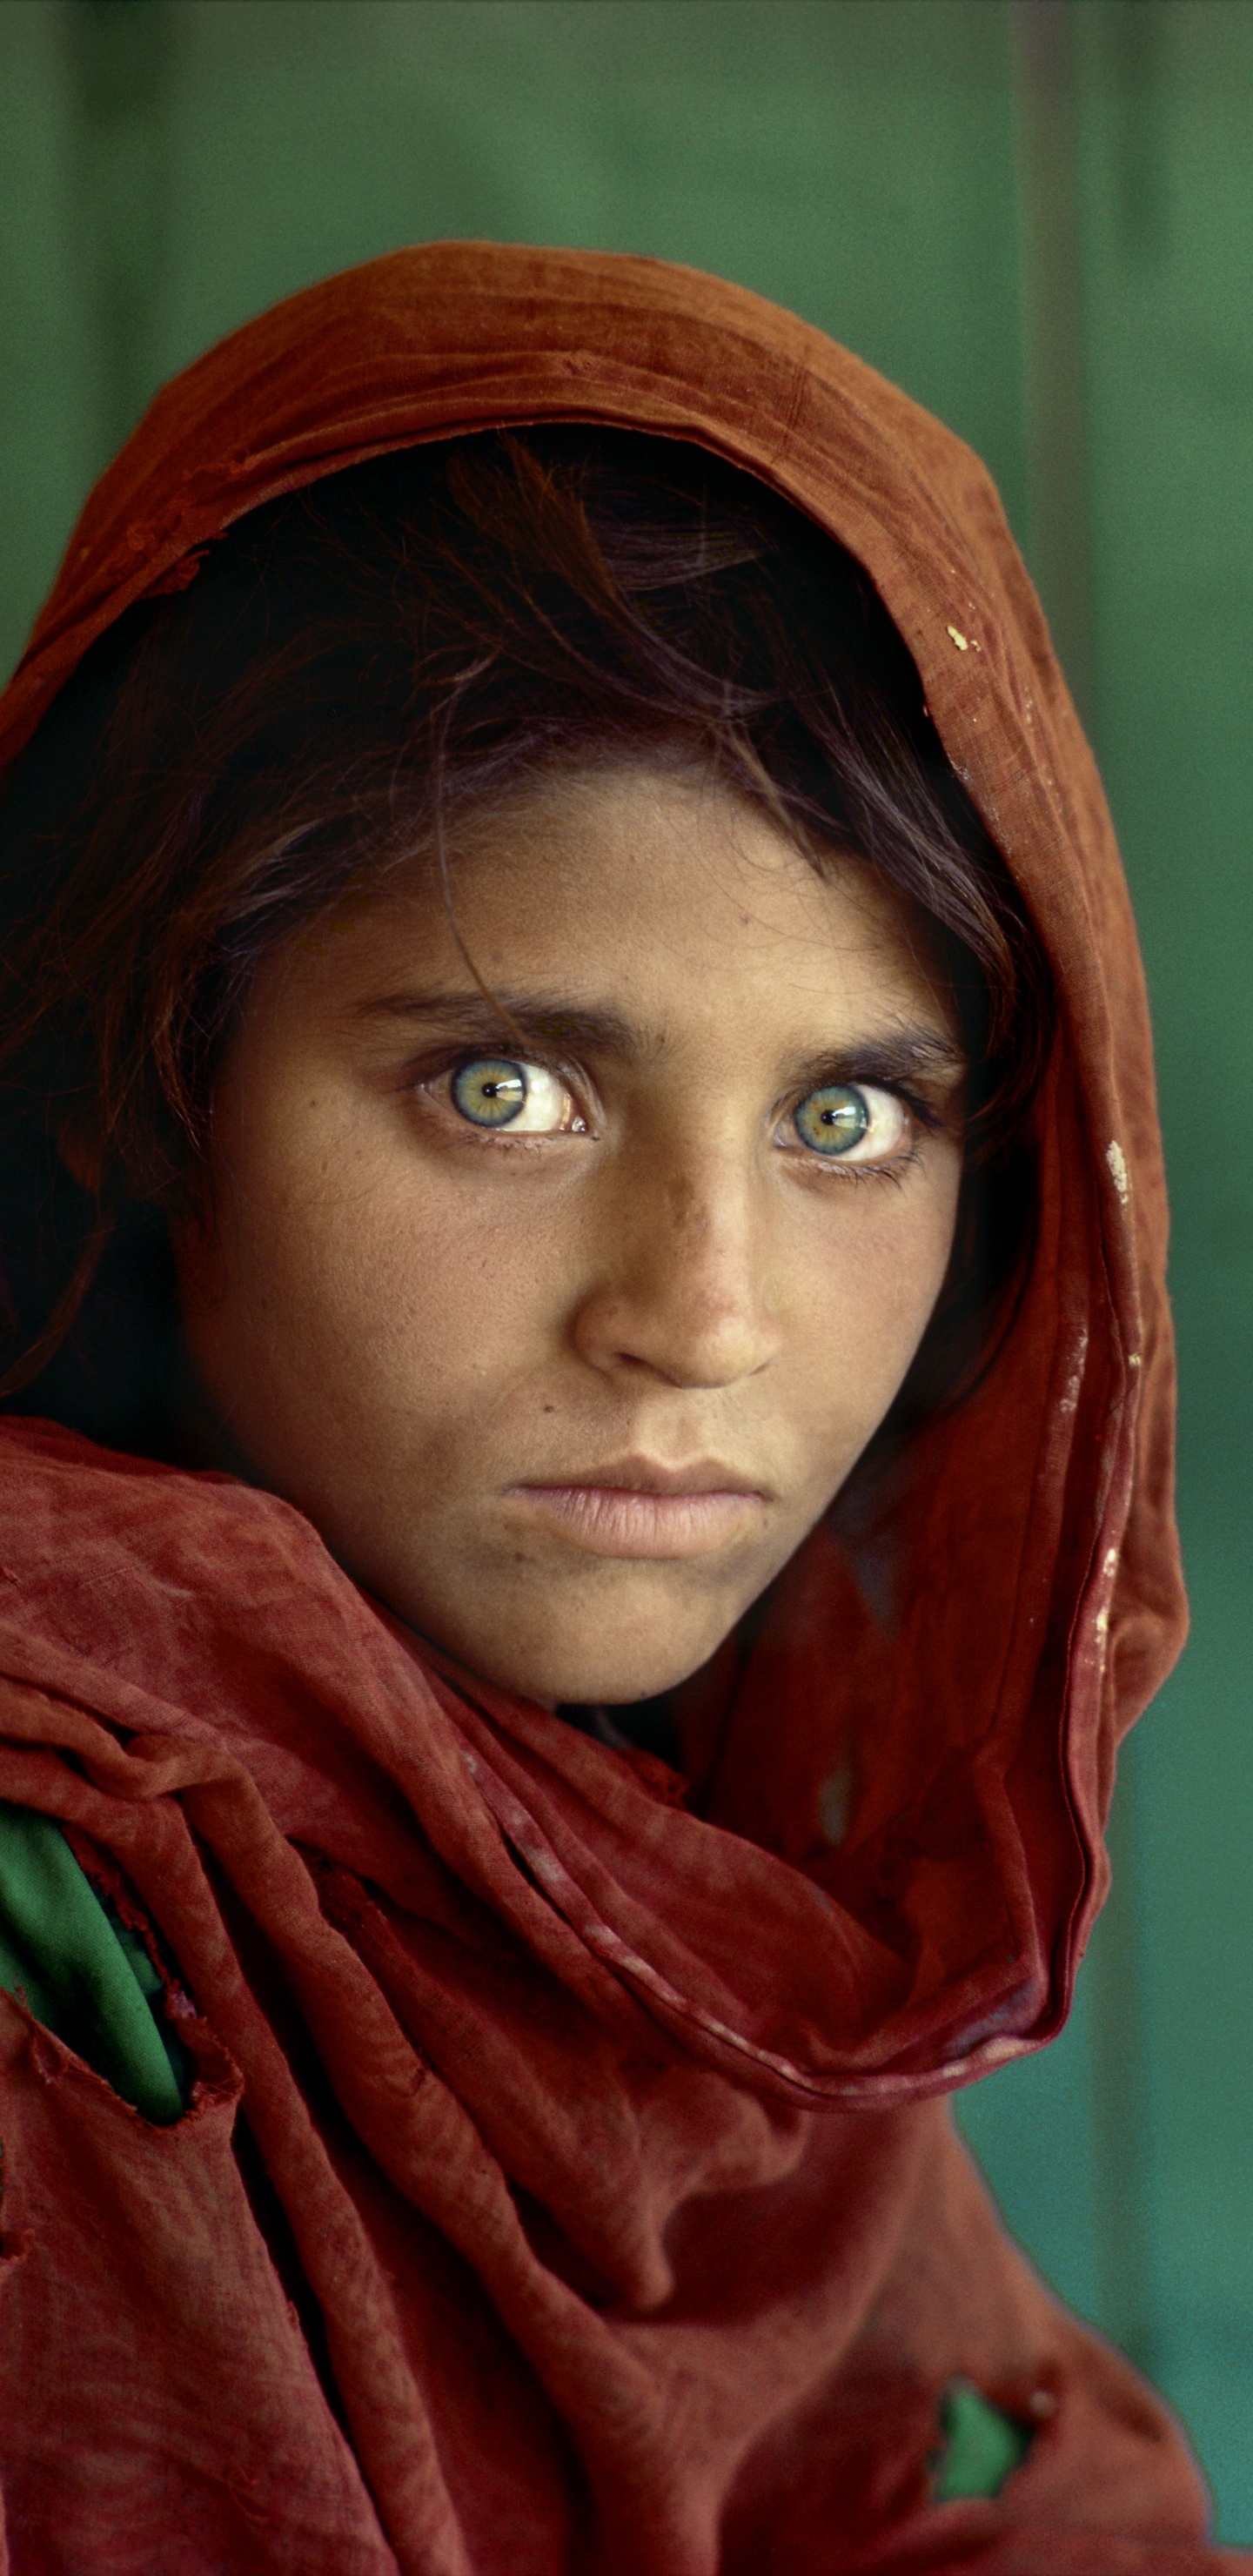 Afghan Girl, Afghanistan, National Geographic, Face, Eye. Wallpaper in 1440x2960 Resolution